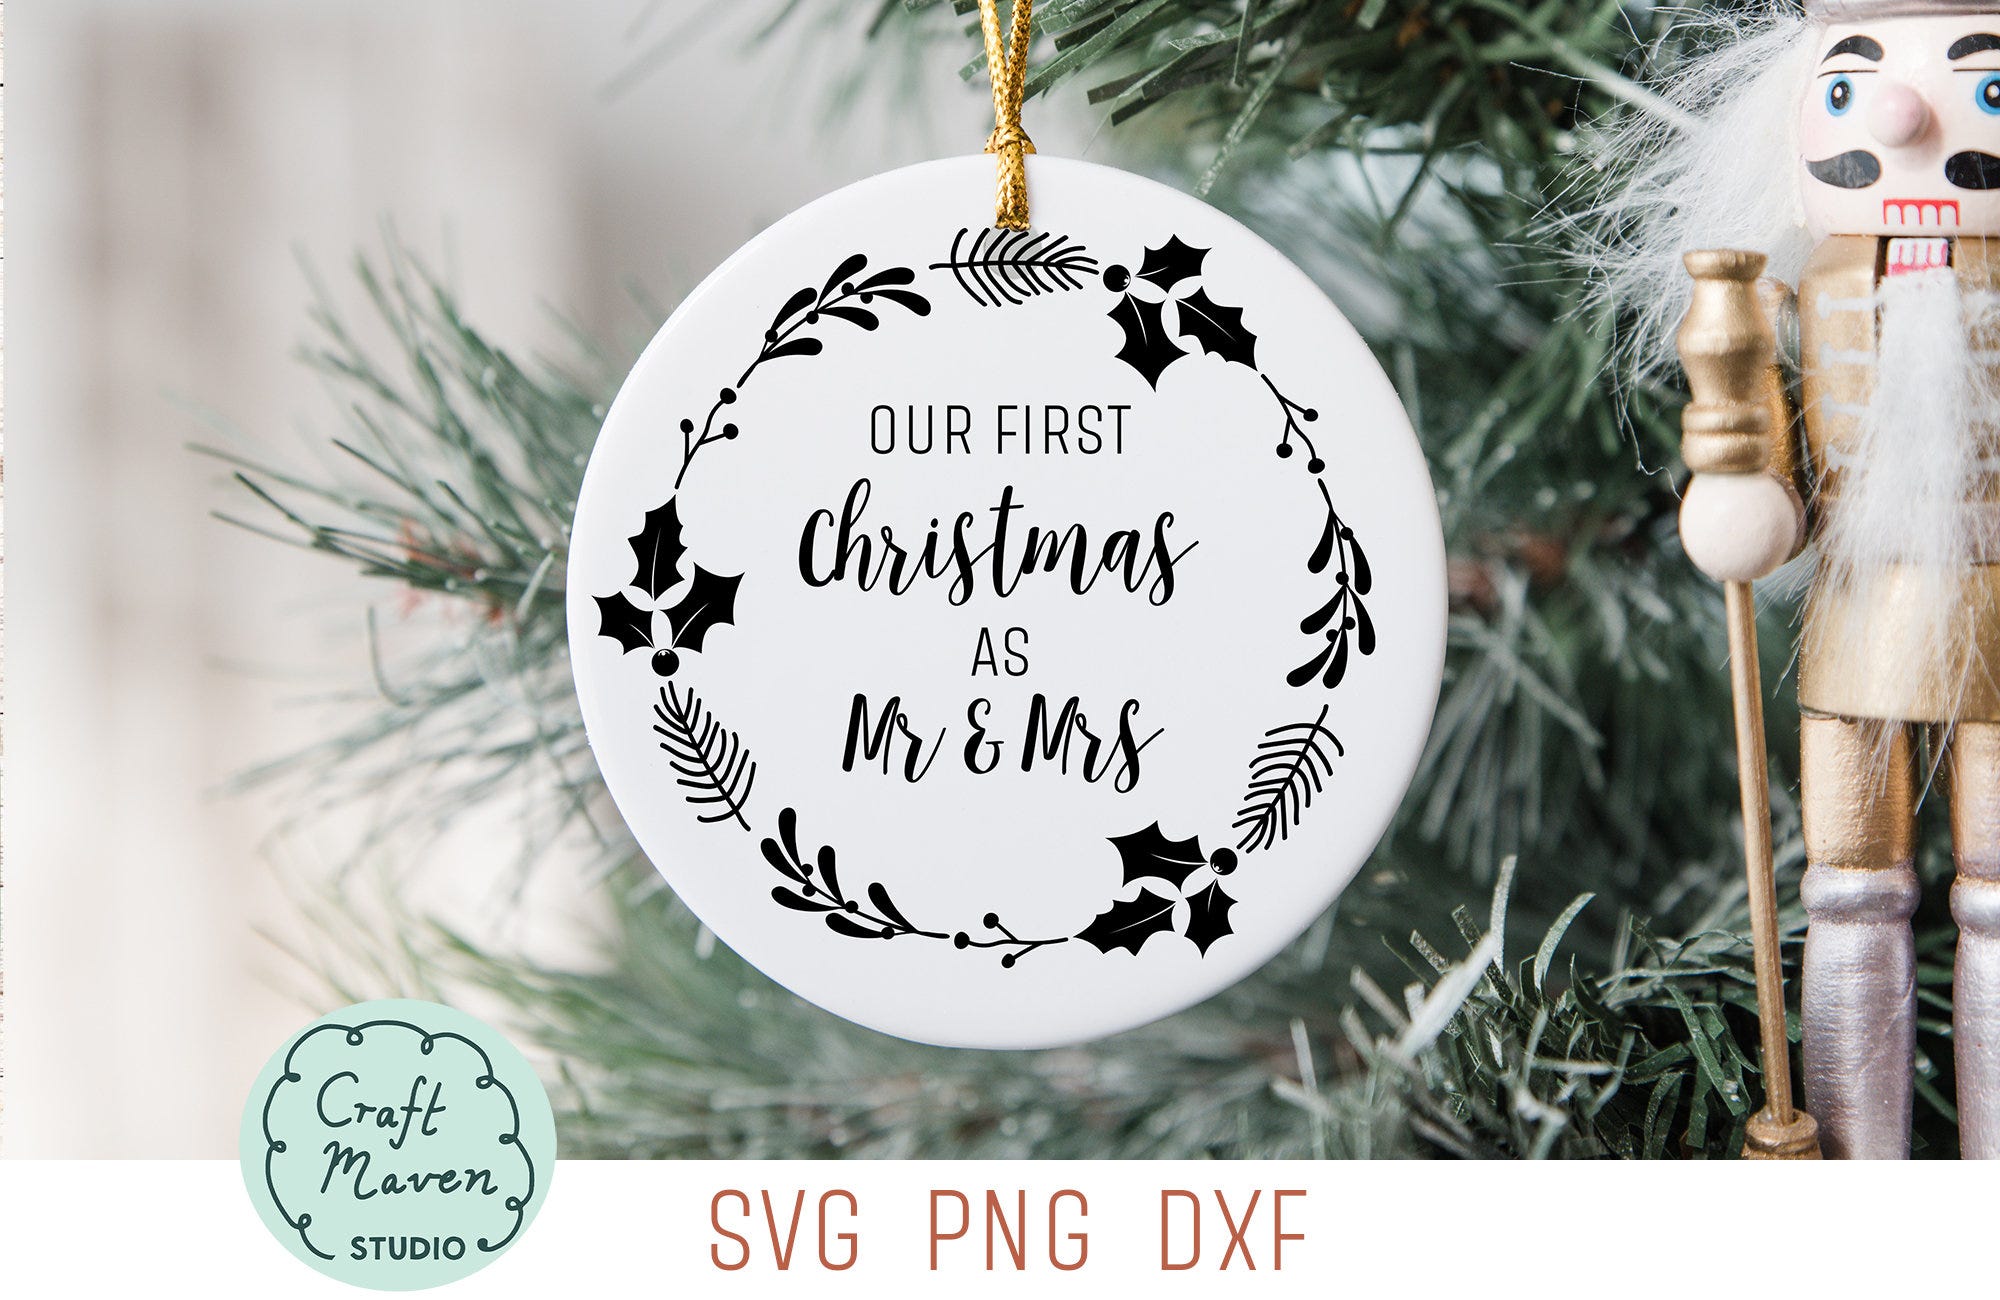 Our first Christmas as Mr and Mrs SVG, Just Married SVG, Christmas Ornament SVG, Xmas Decoration Svg, Christmas Wreath Svg, His and hers svg